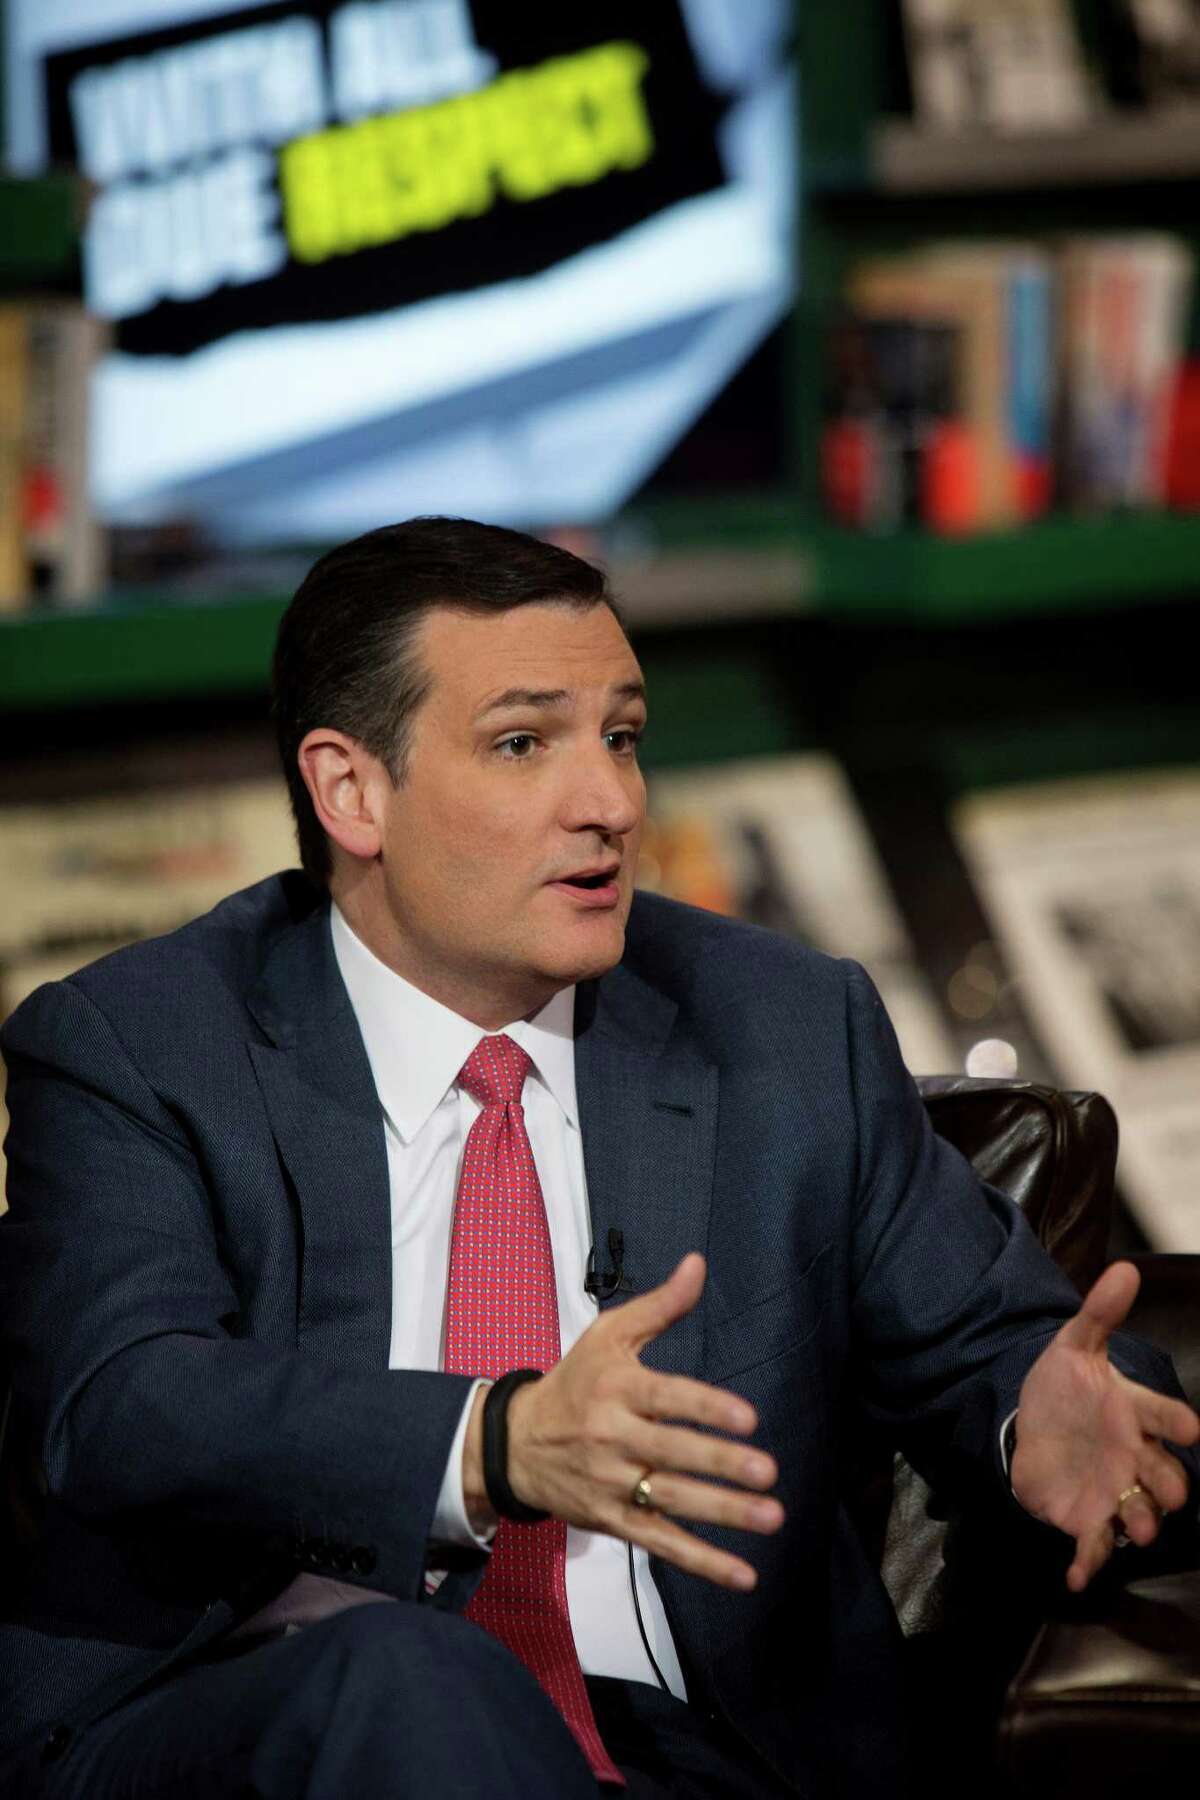 U.S. Sen. Ted Cruz surprised both backers and opponents of the Affordable Care Act by saying he was considering signing his family up.